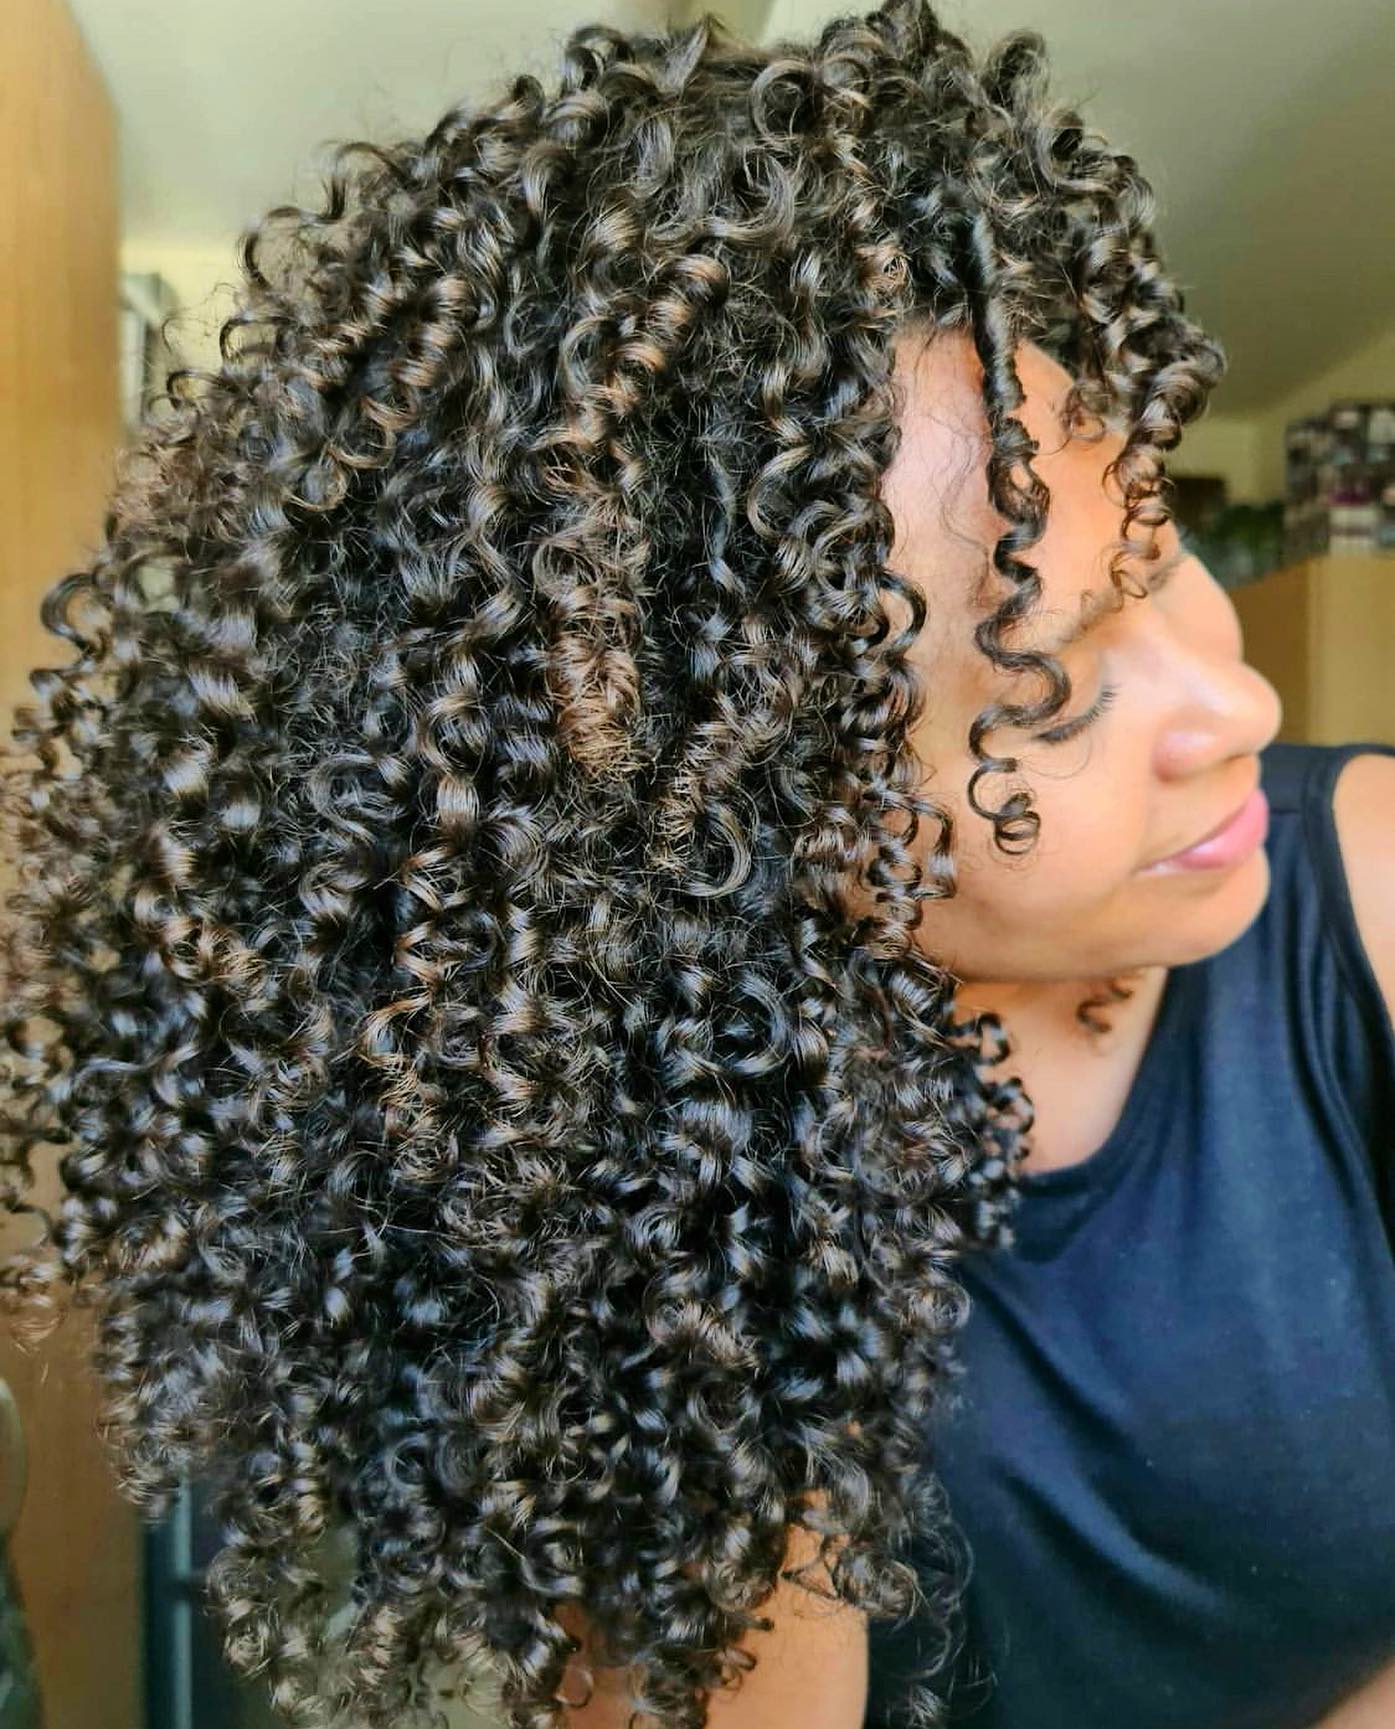 Texture Tuesday featuring defined & voluminous curls courtesy of @letts_curl 